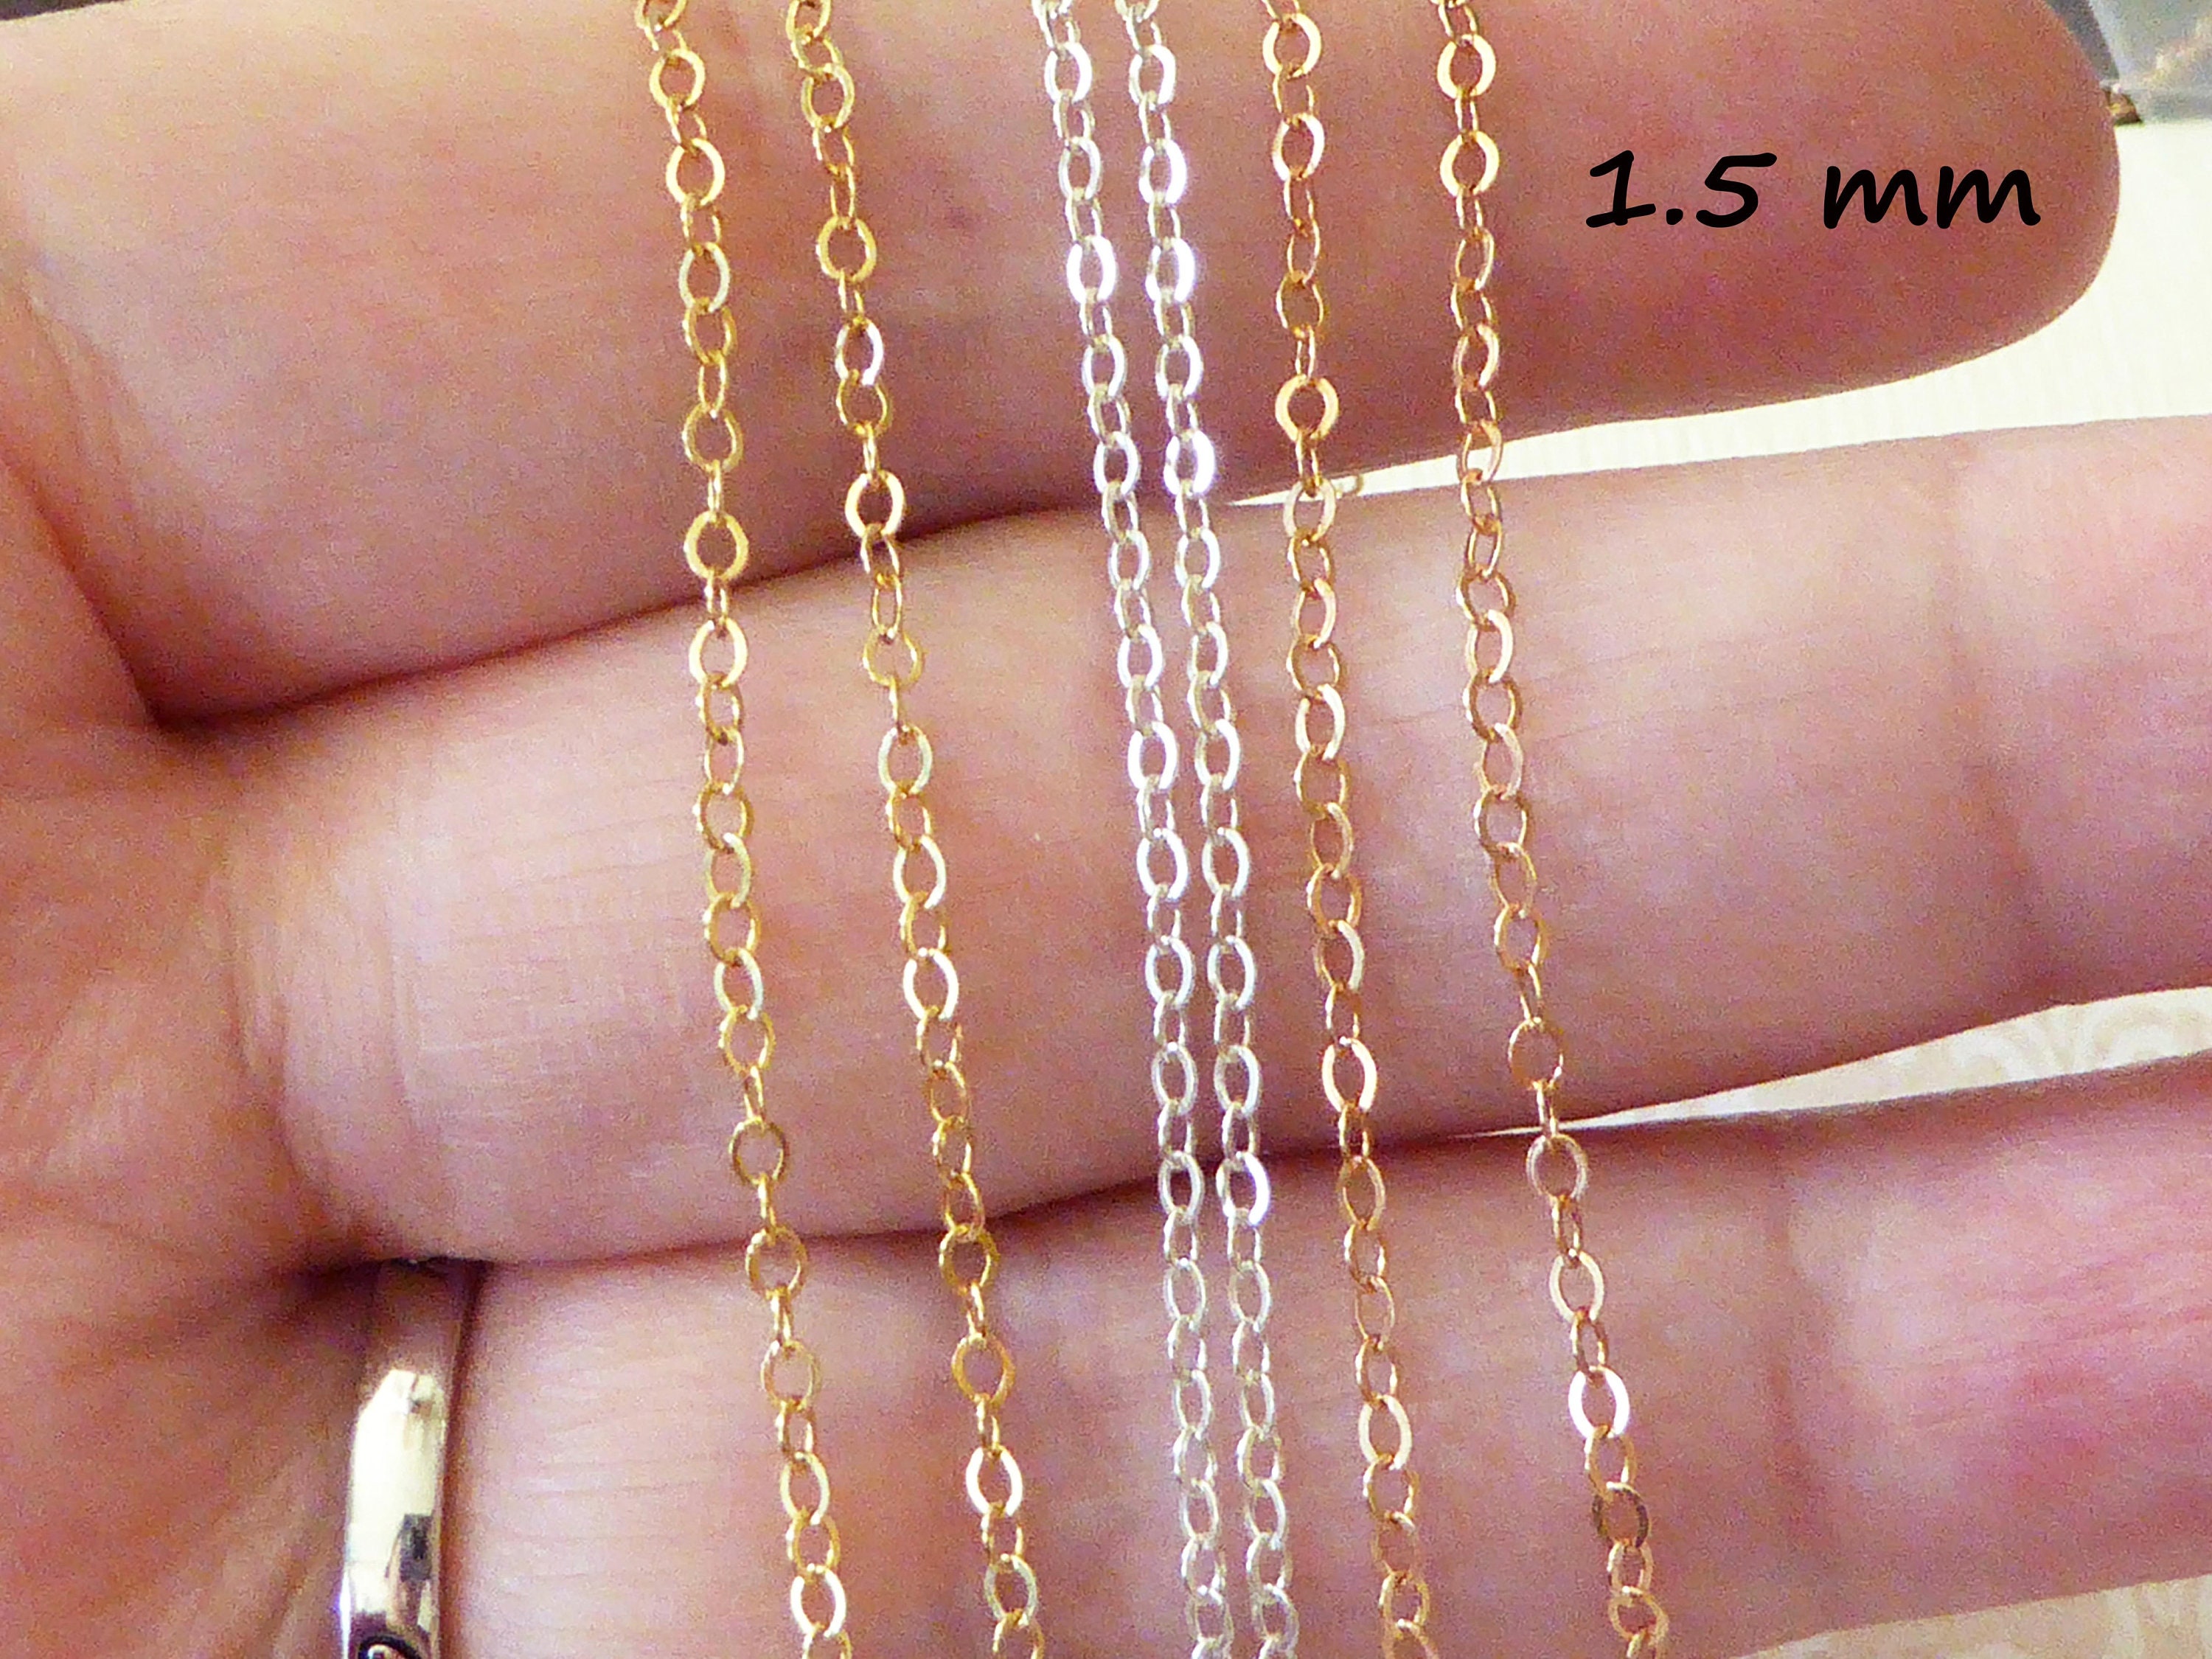 14K Gold Filled Flat Cable Chain 1.6x2.1 mm